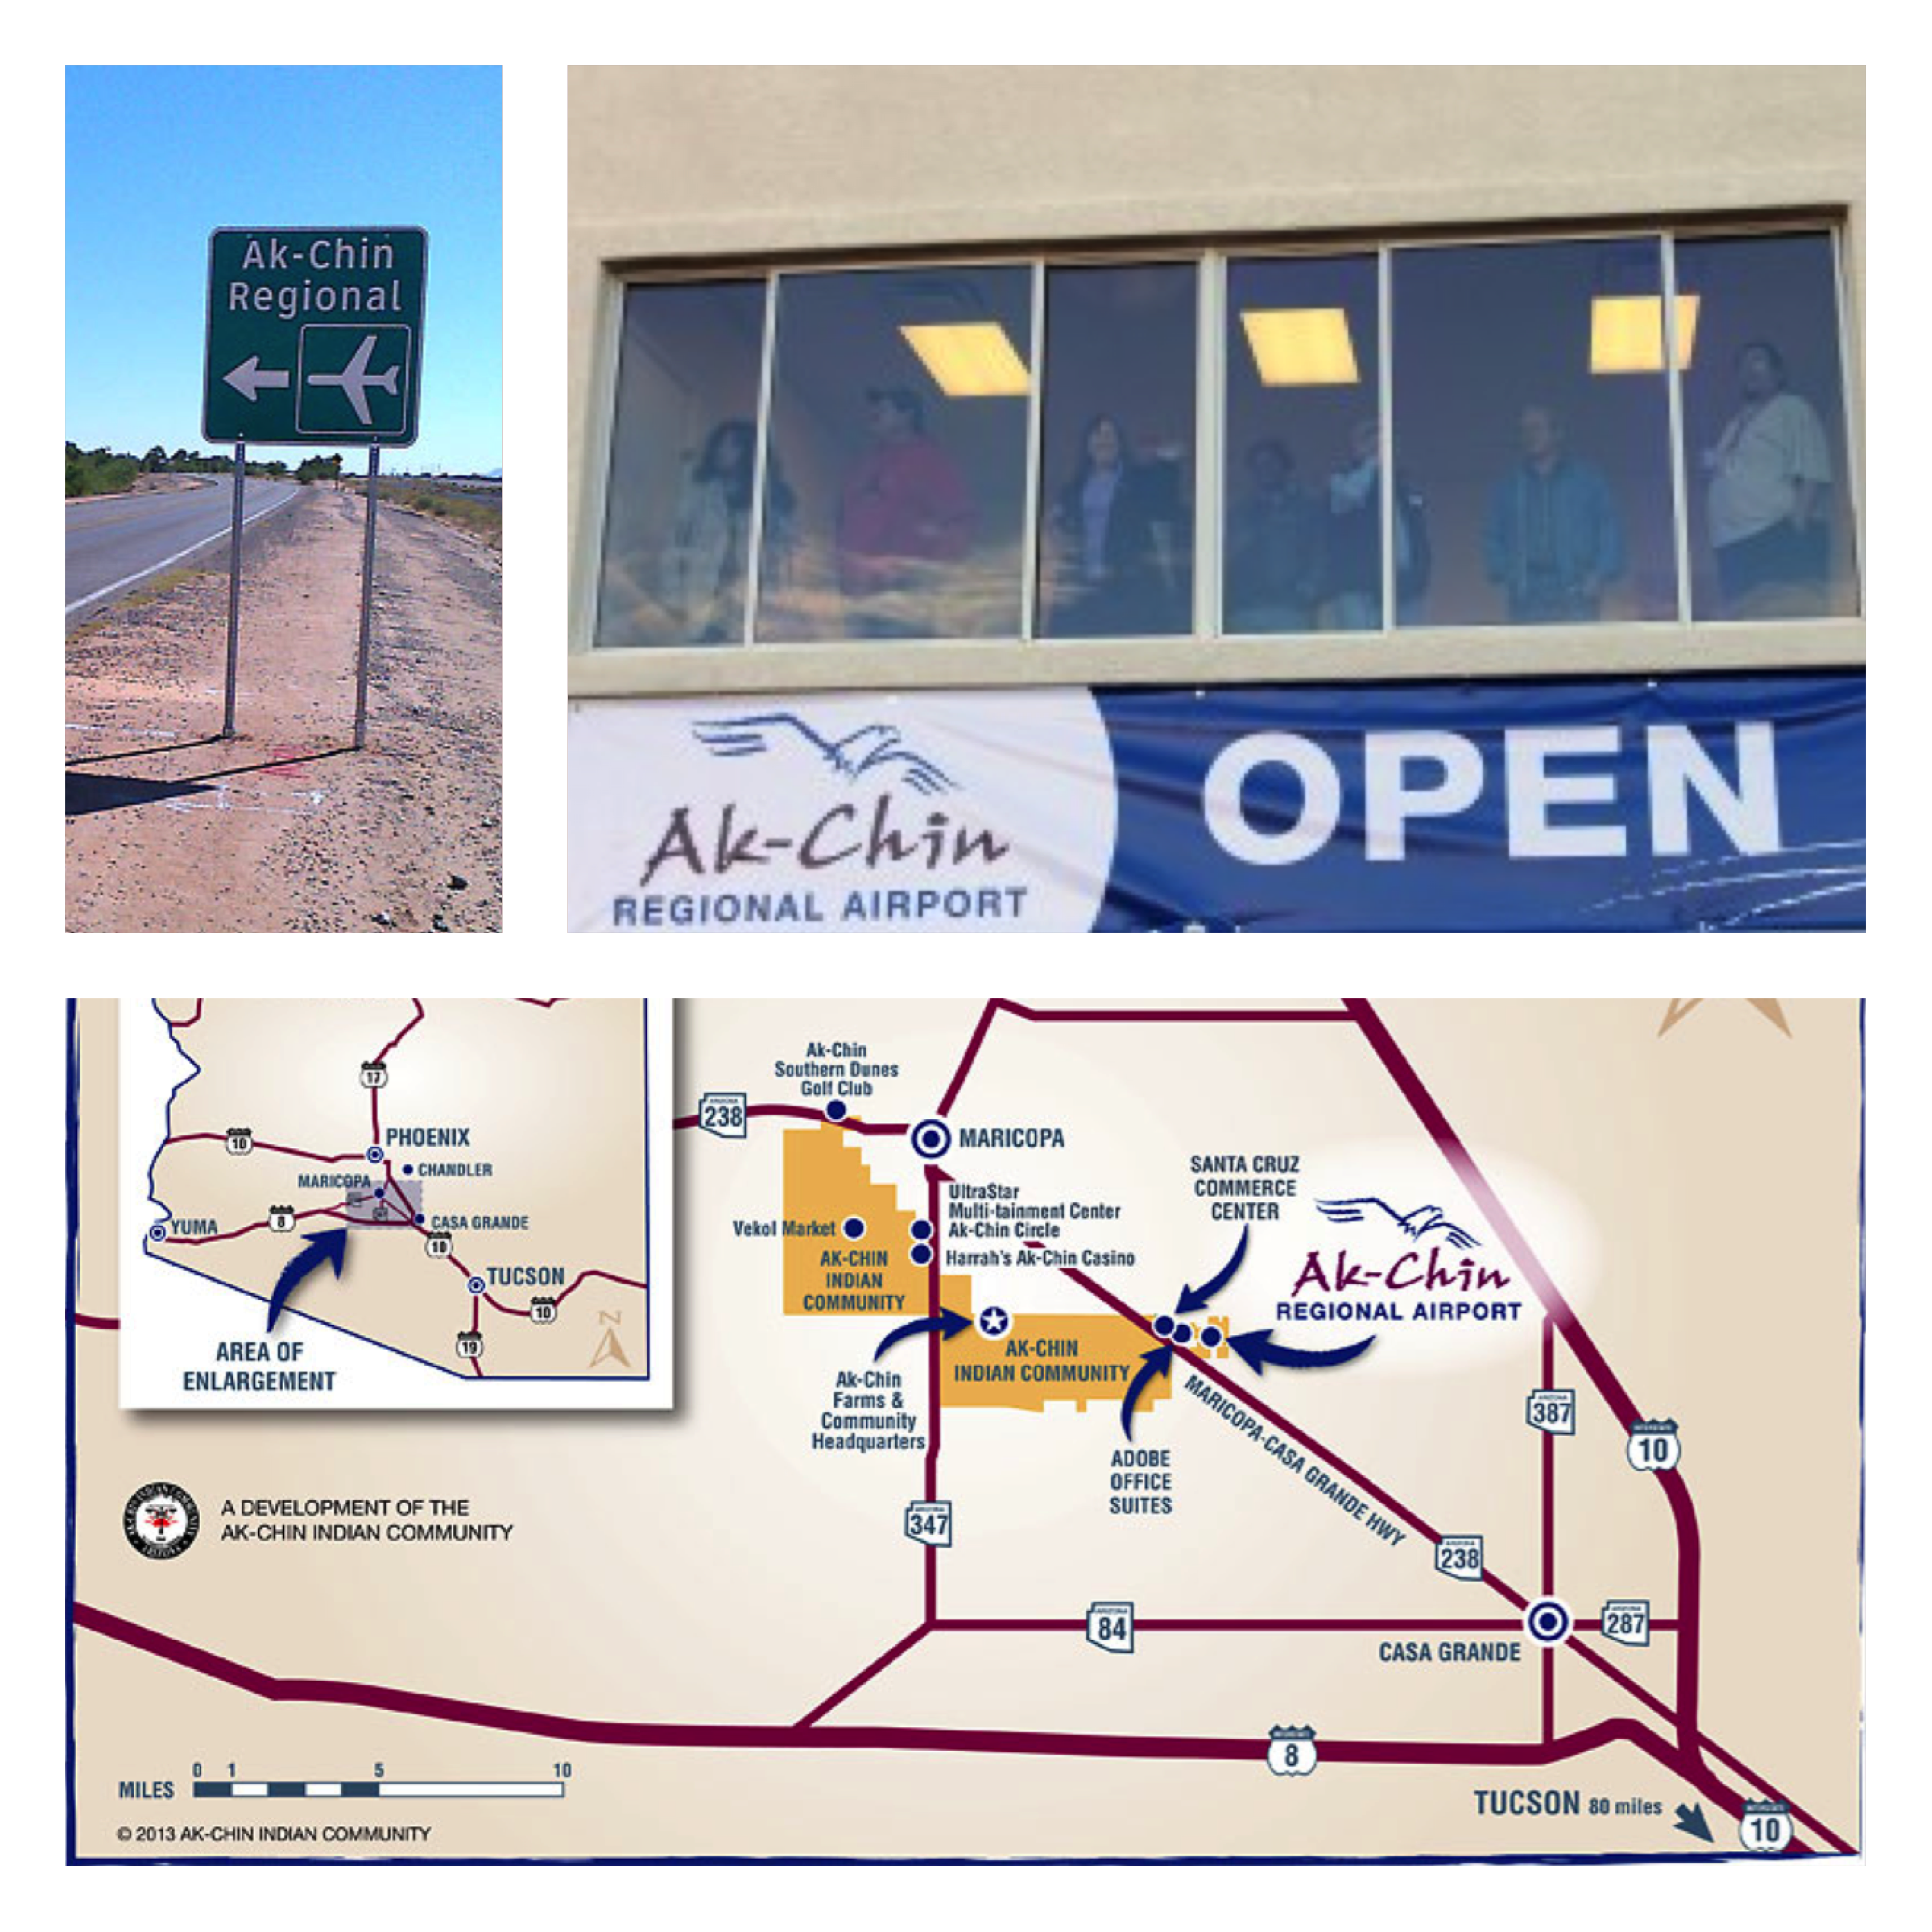 2006 - The previously named Phoenix Regional Airport was purchased and was renamed the Ak-Chin Regional Airport. The Ak-Chin Regional Airport is located near the Santa Cruz Commerce Center and is 170 acres with a 5,000 ft. runway. Renovations are scheduled for the airport building and runway.